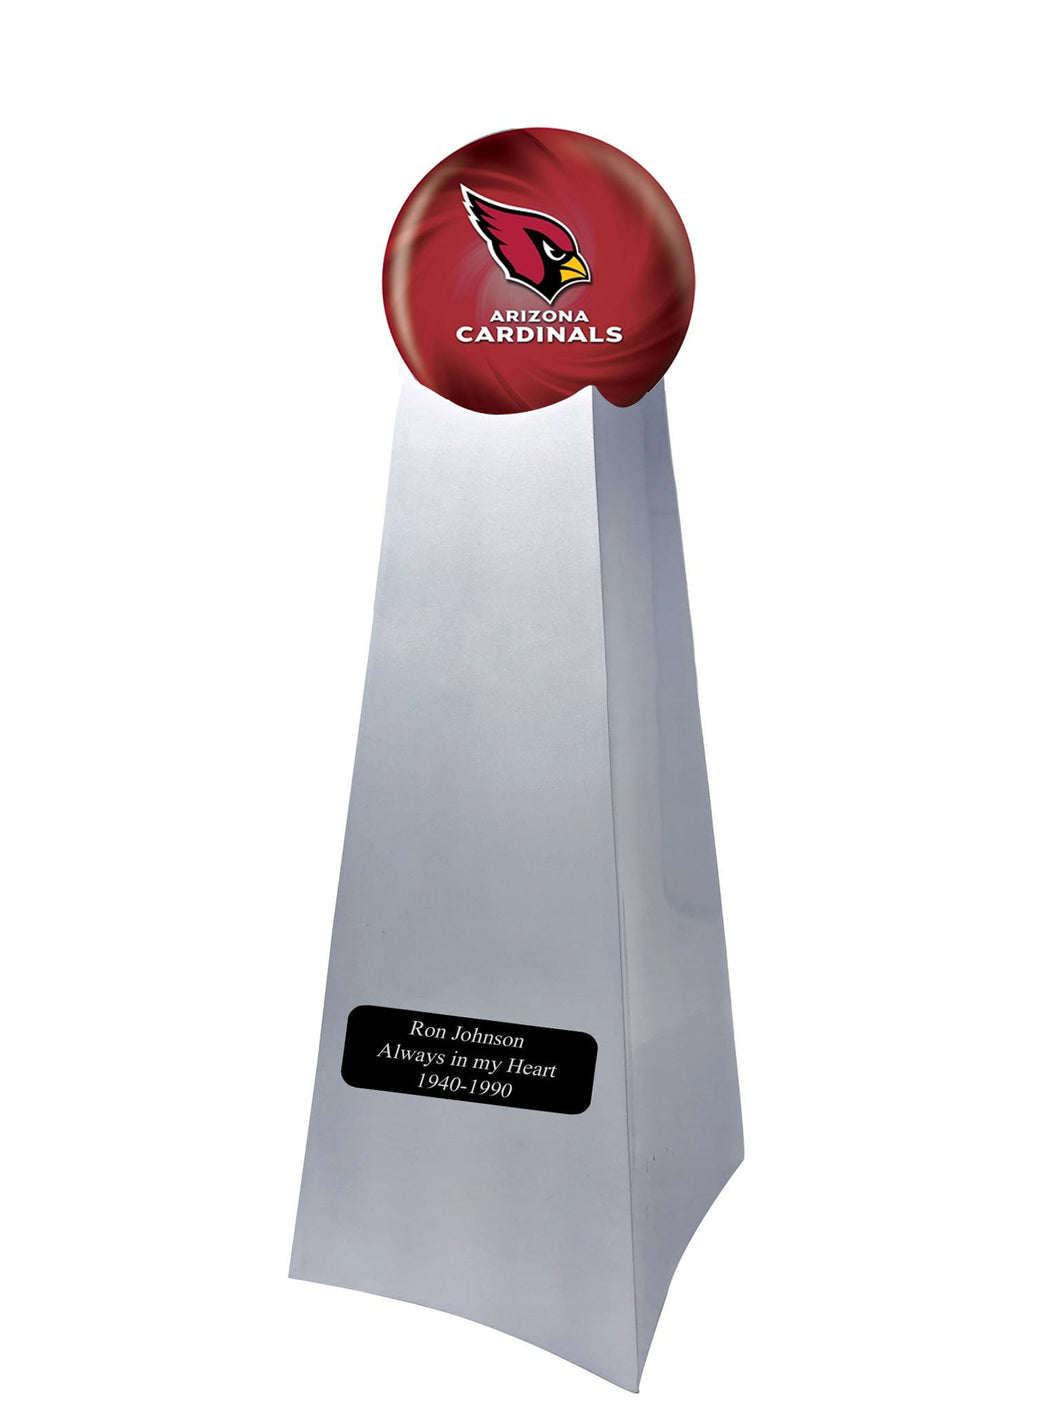 Arizona Cardinals Football Championship Trophy Large/Adult Cremation Urn 200 Cubic Inches